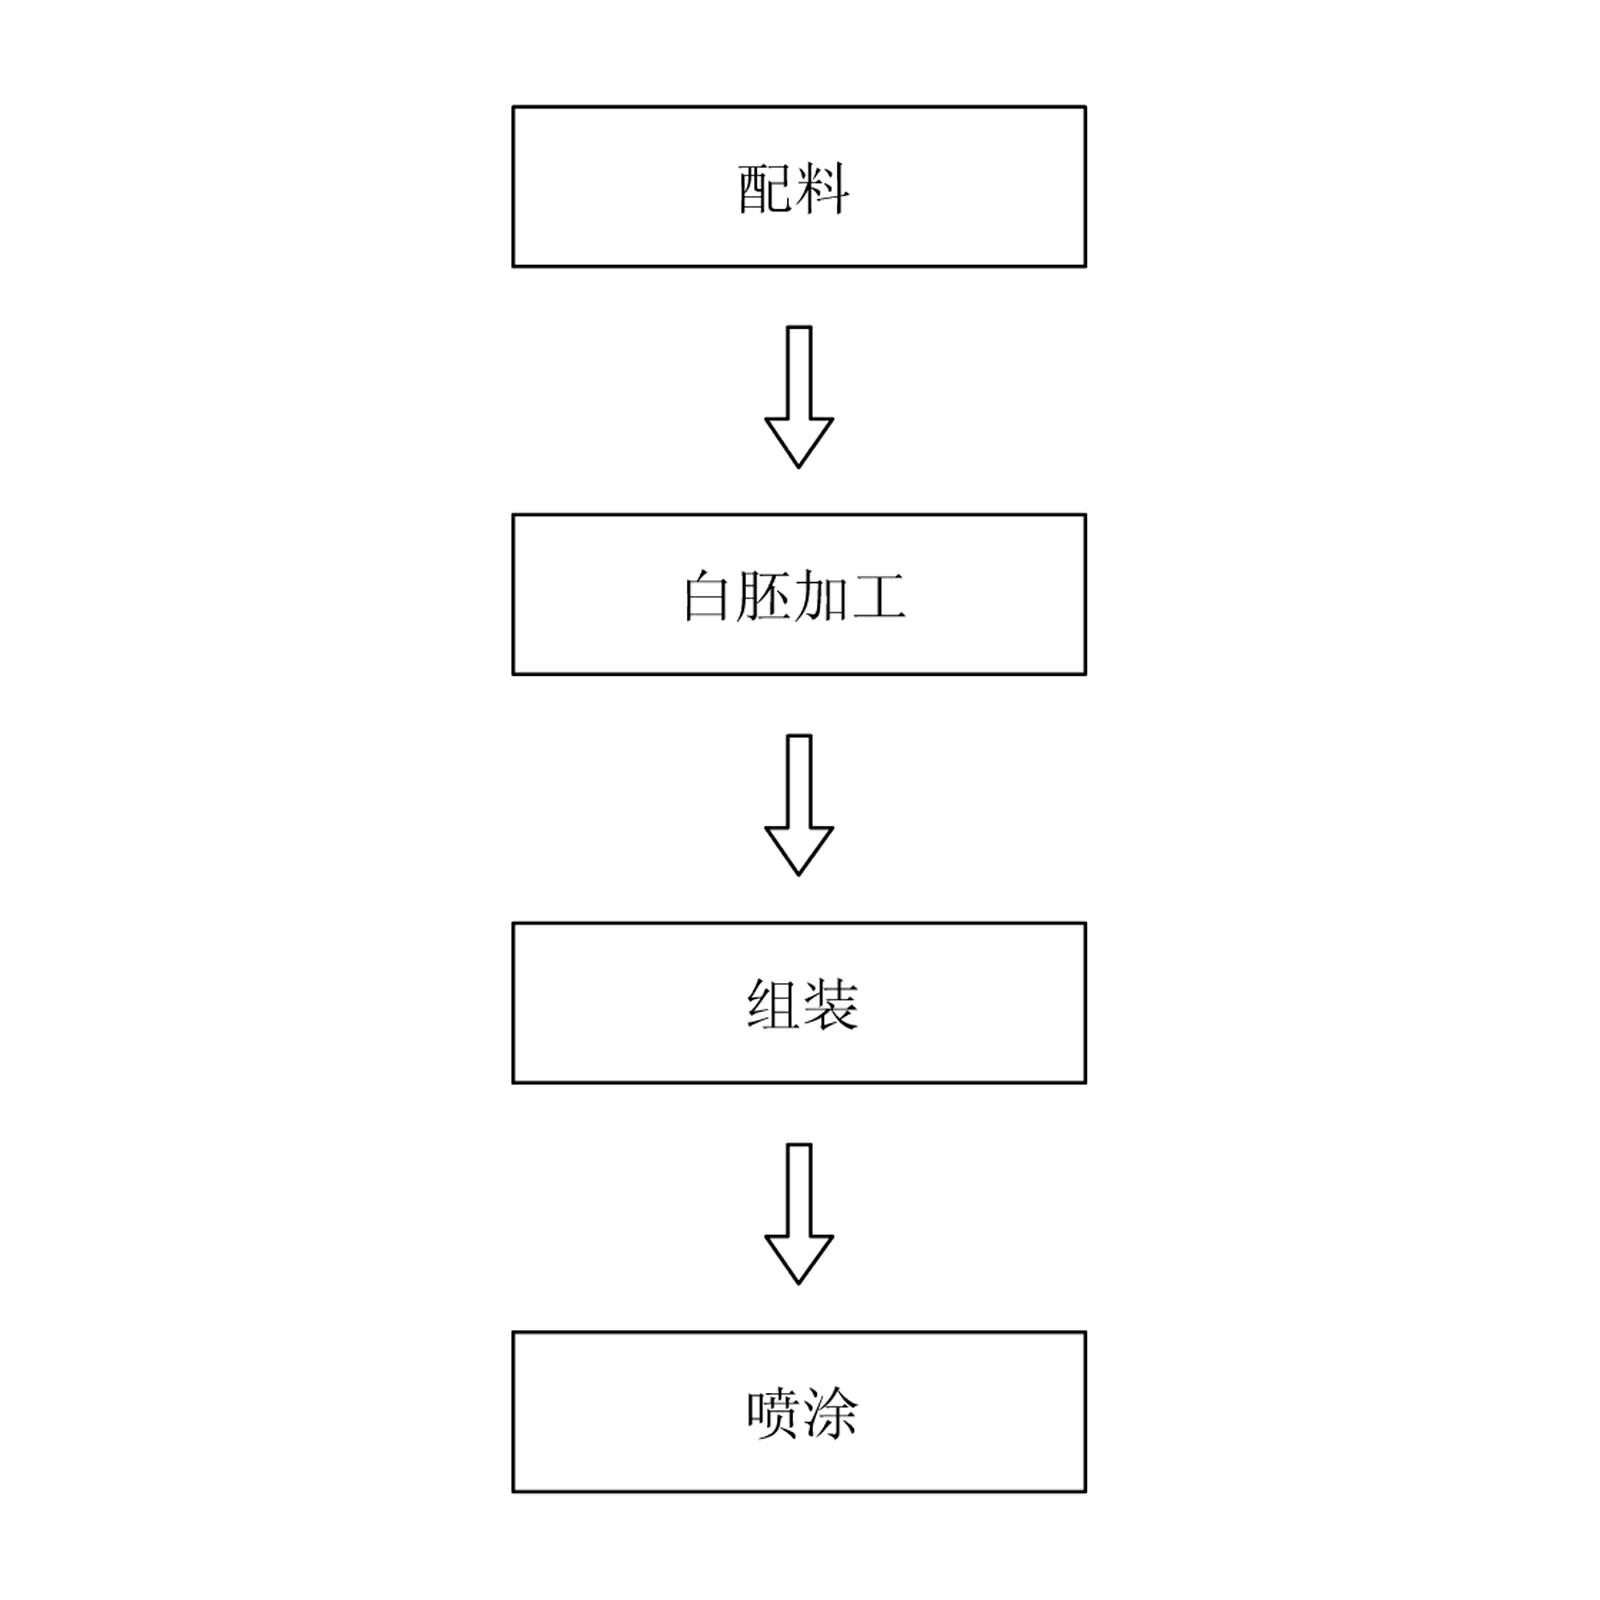 Method for producing and processing anti-pollution wooden door